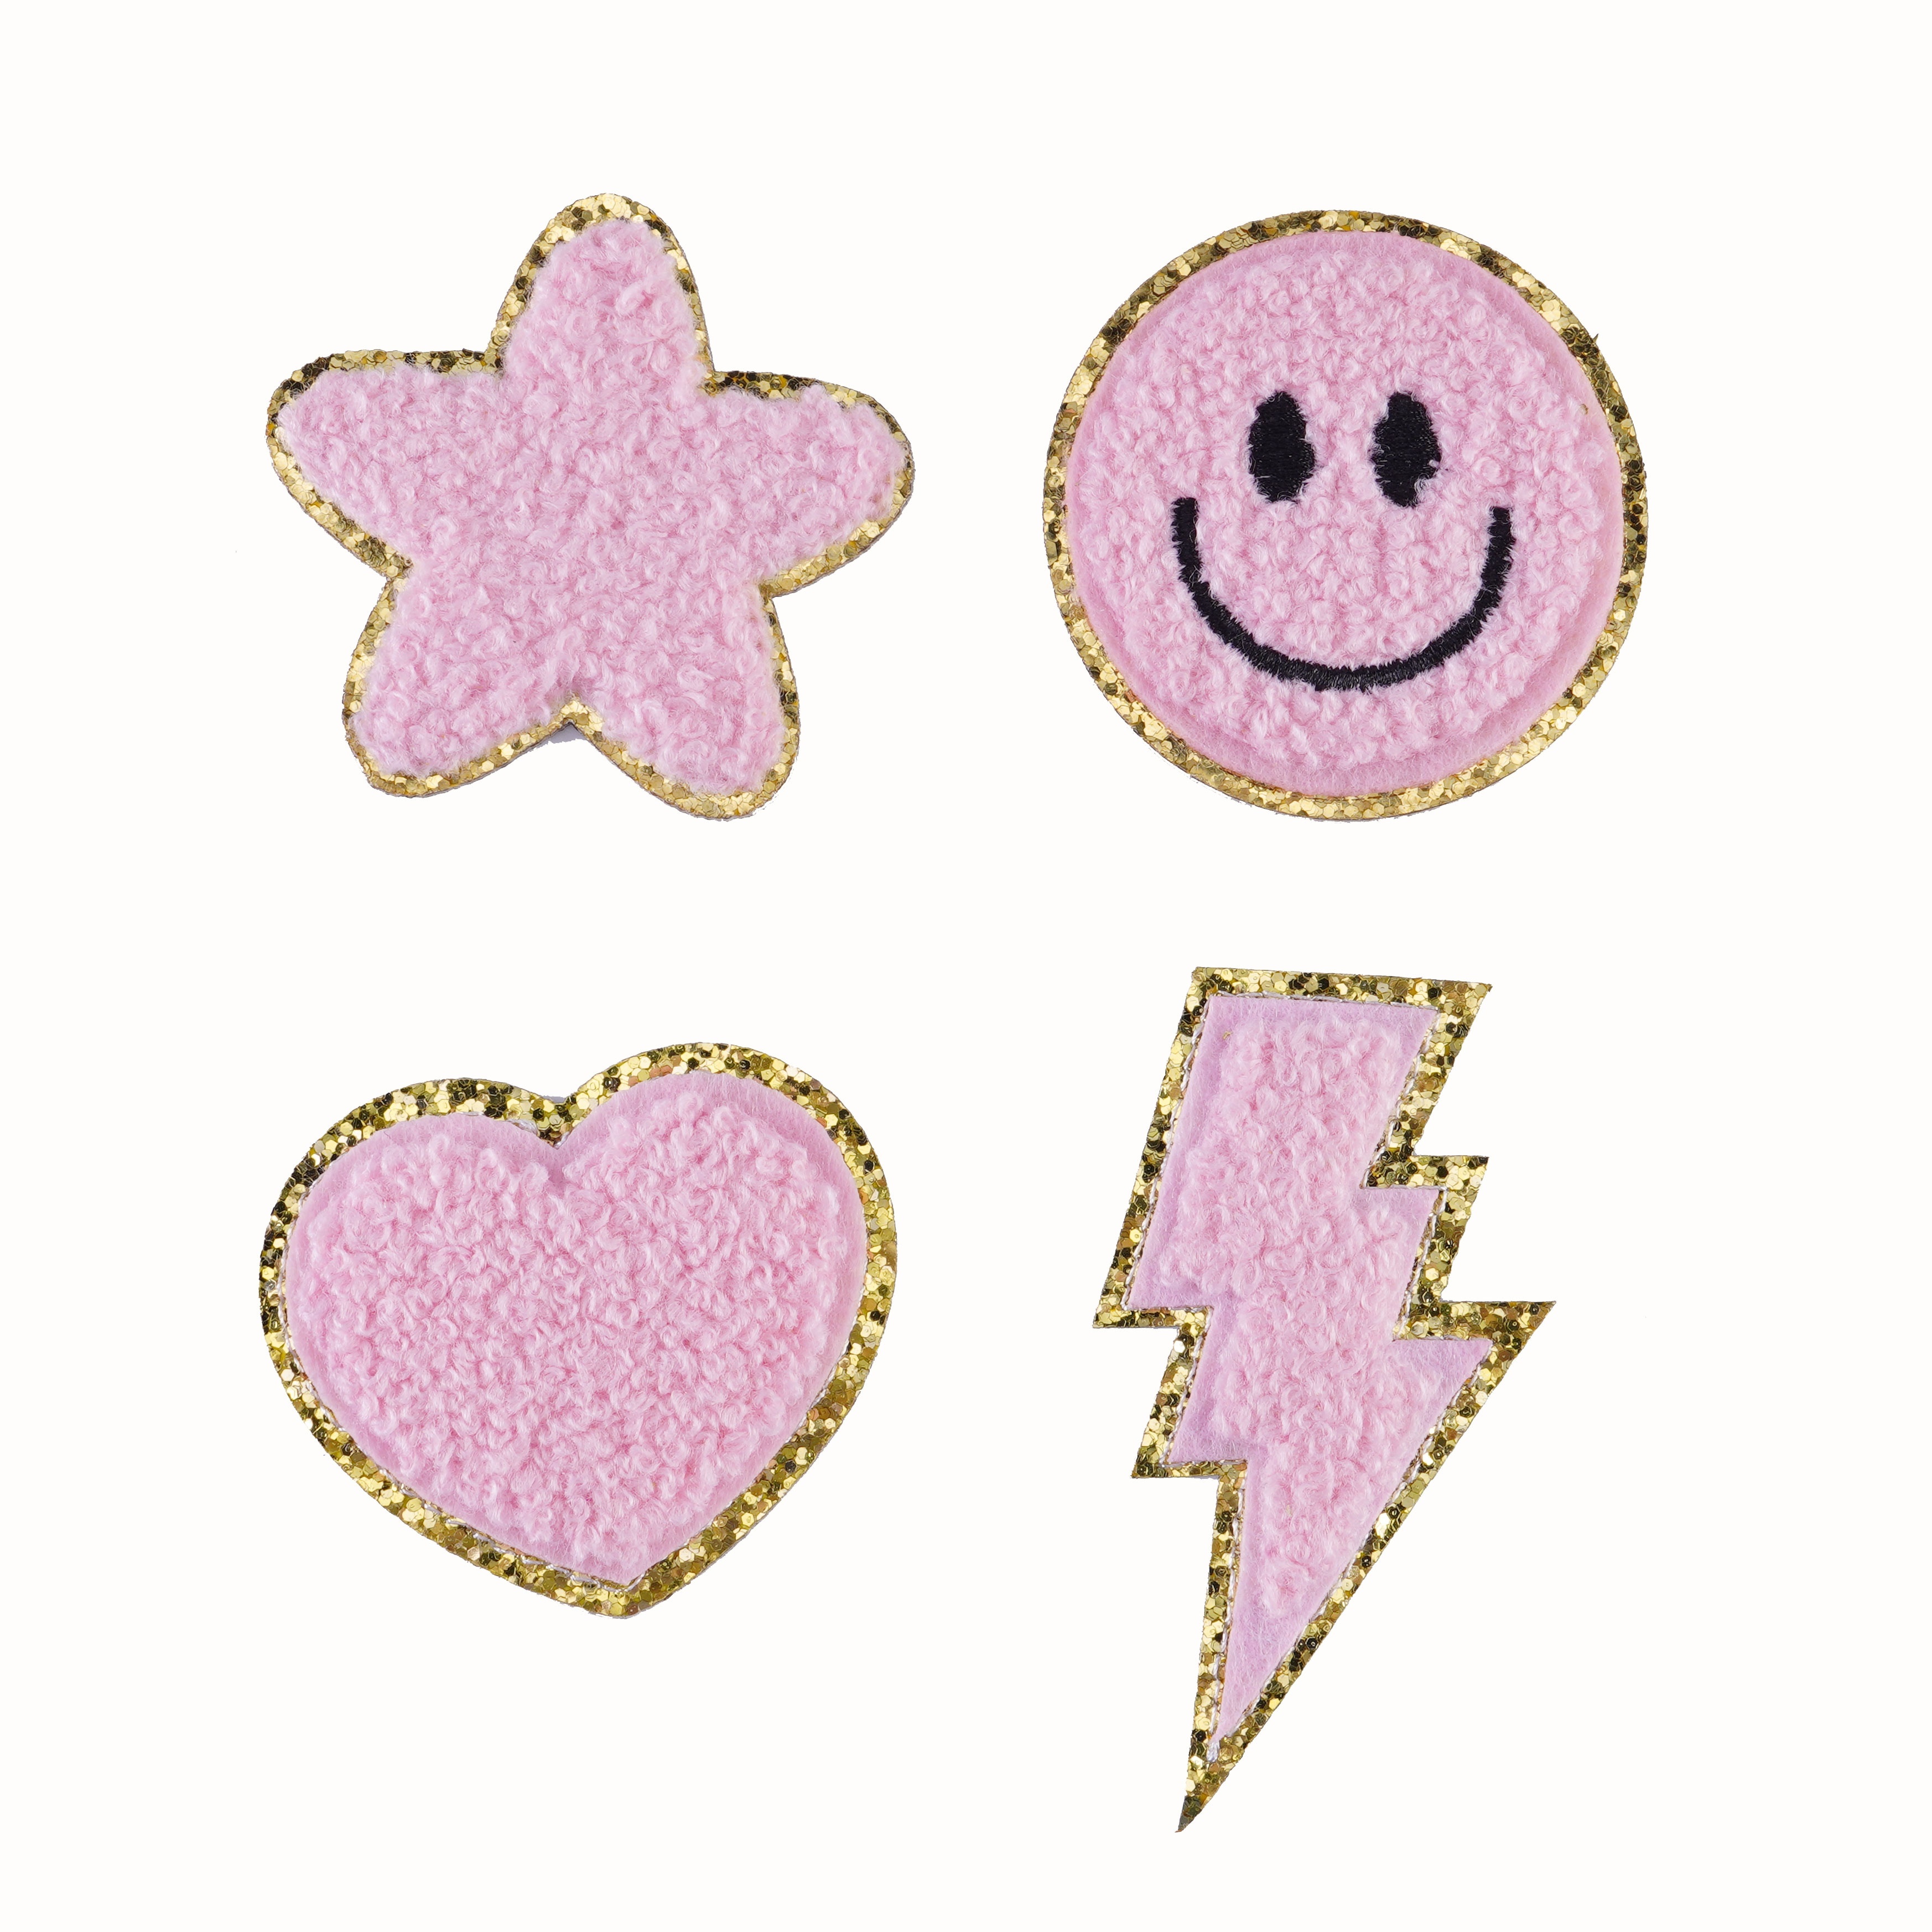 Cry Baby // Smiley Face DIY Embroidered Patch Applique Mental Illness Craft  Cute Gift for Her Him Iron Sew on Patches for Jackets UK Rainbow 